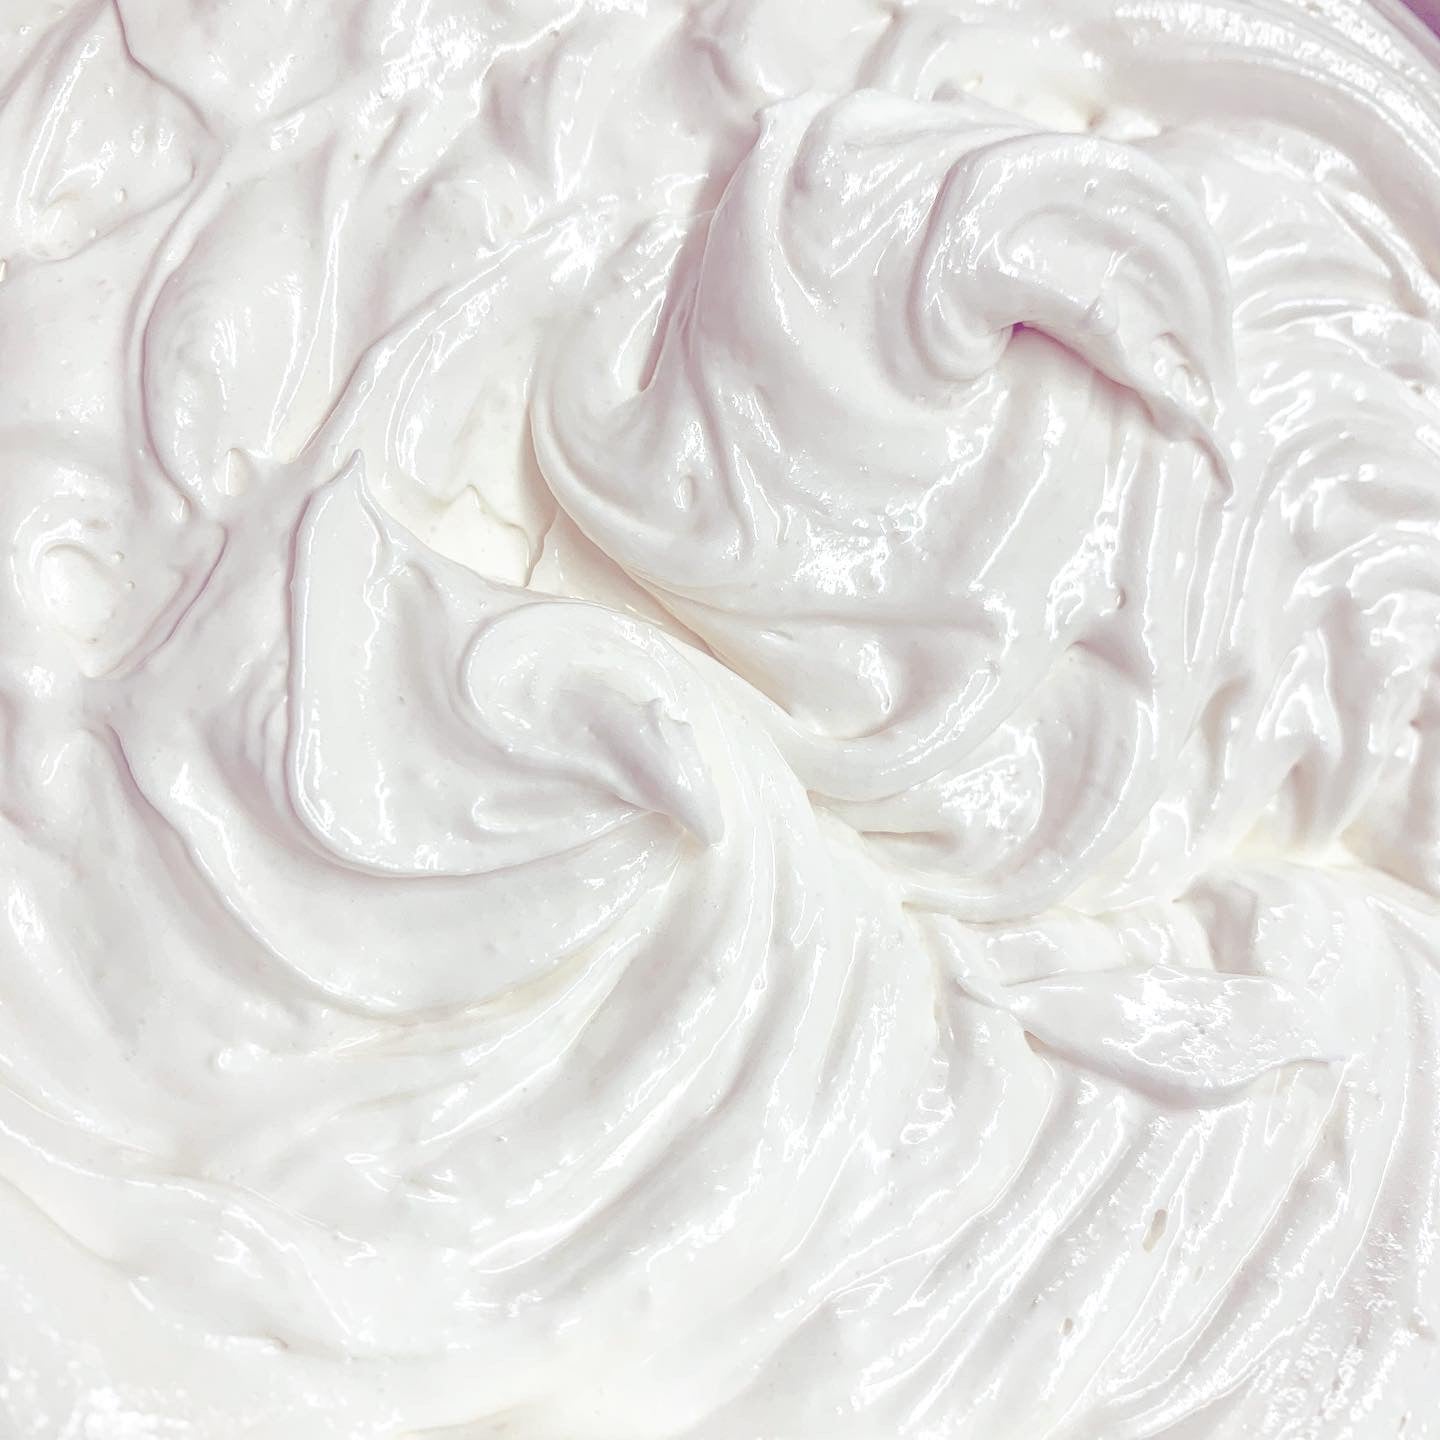 CITRA Crème Whipped Body Butter (citrusy + woodsy)